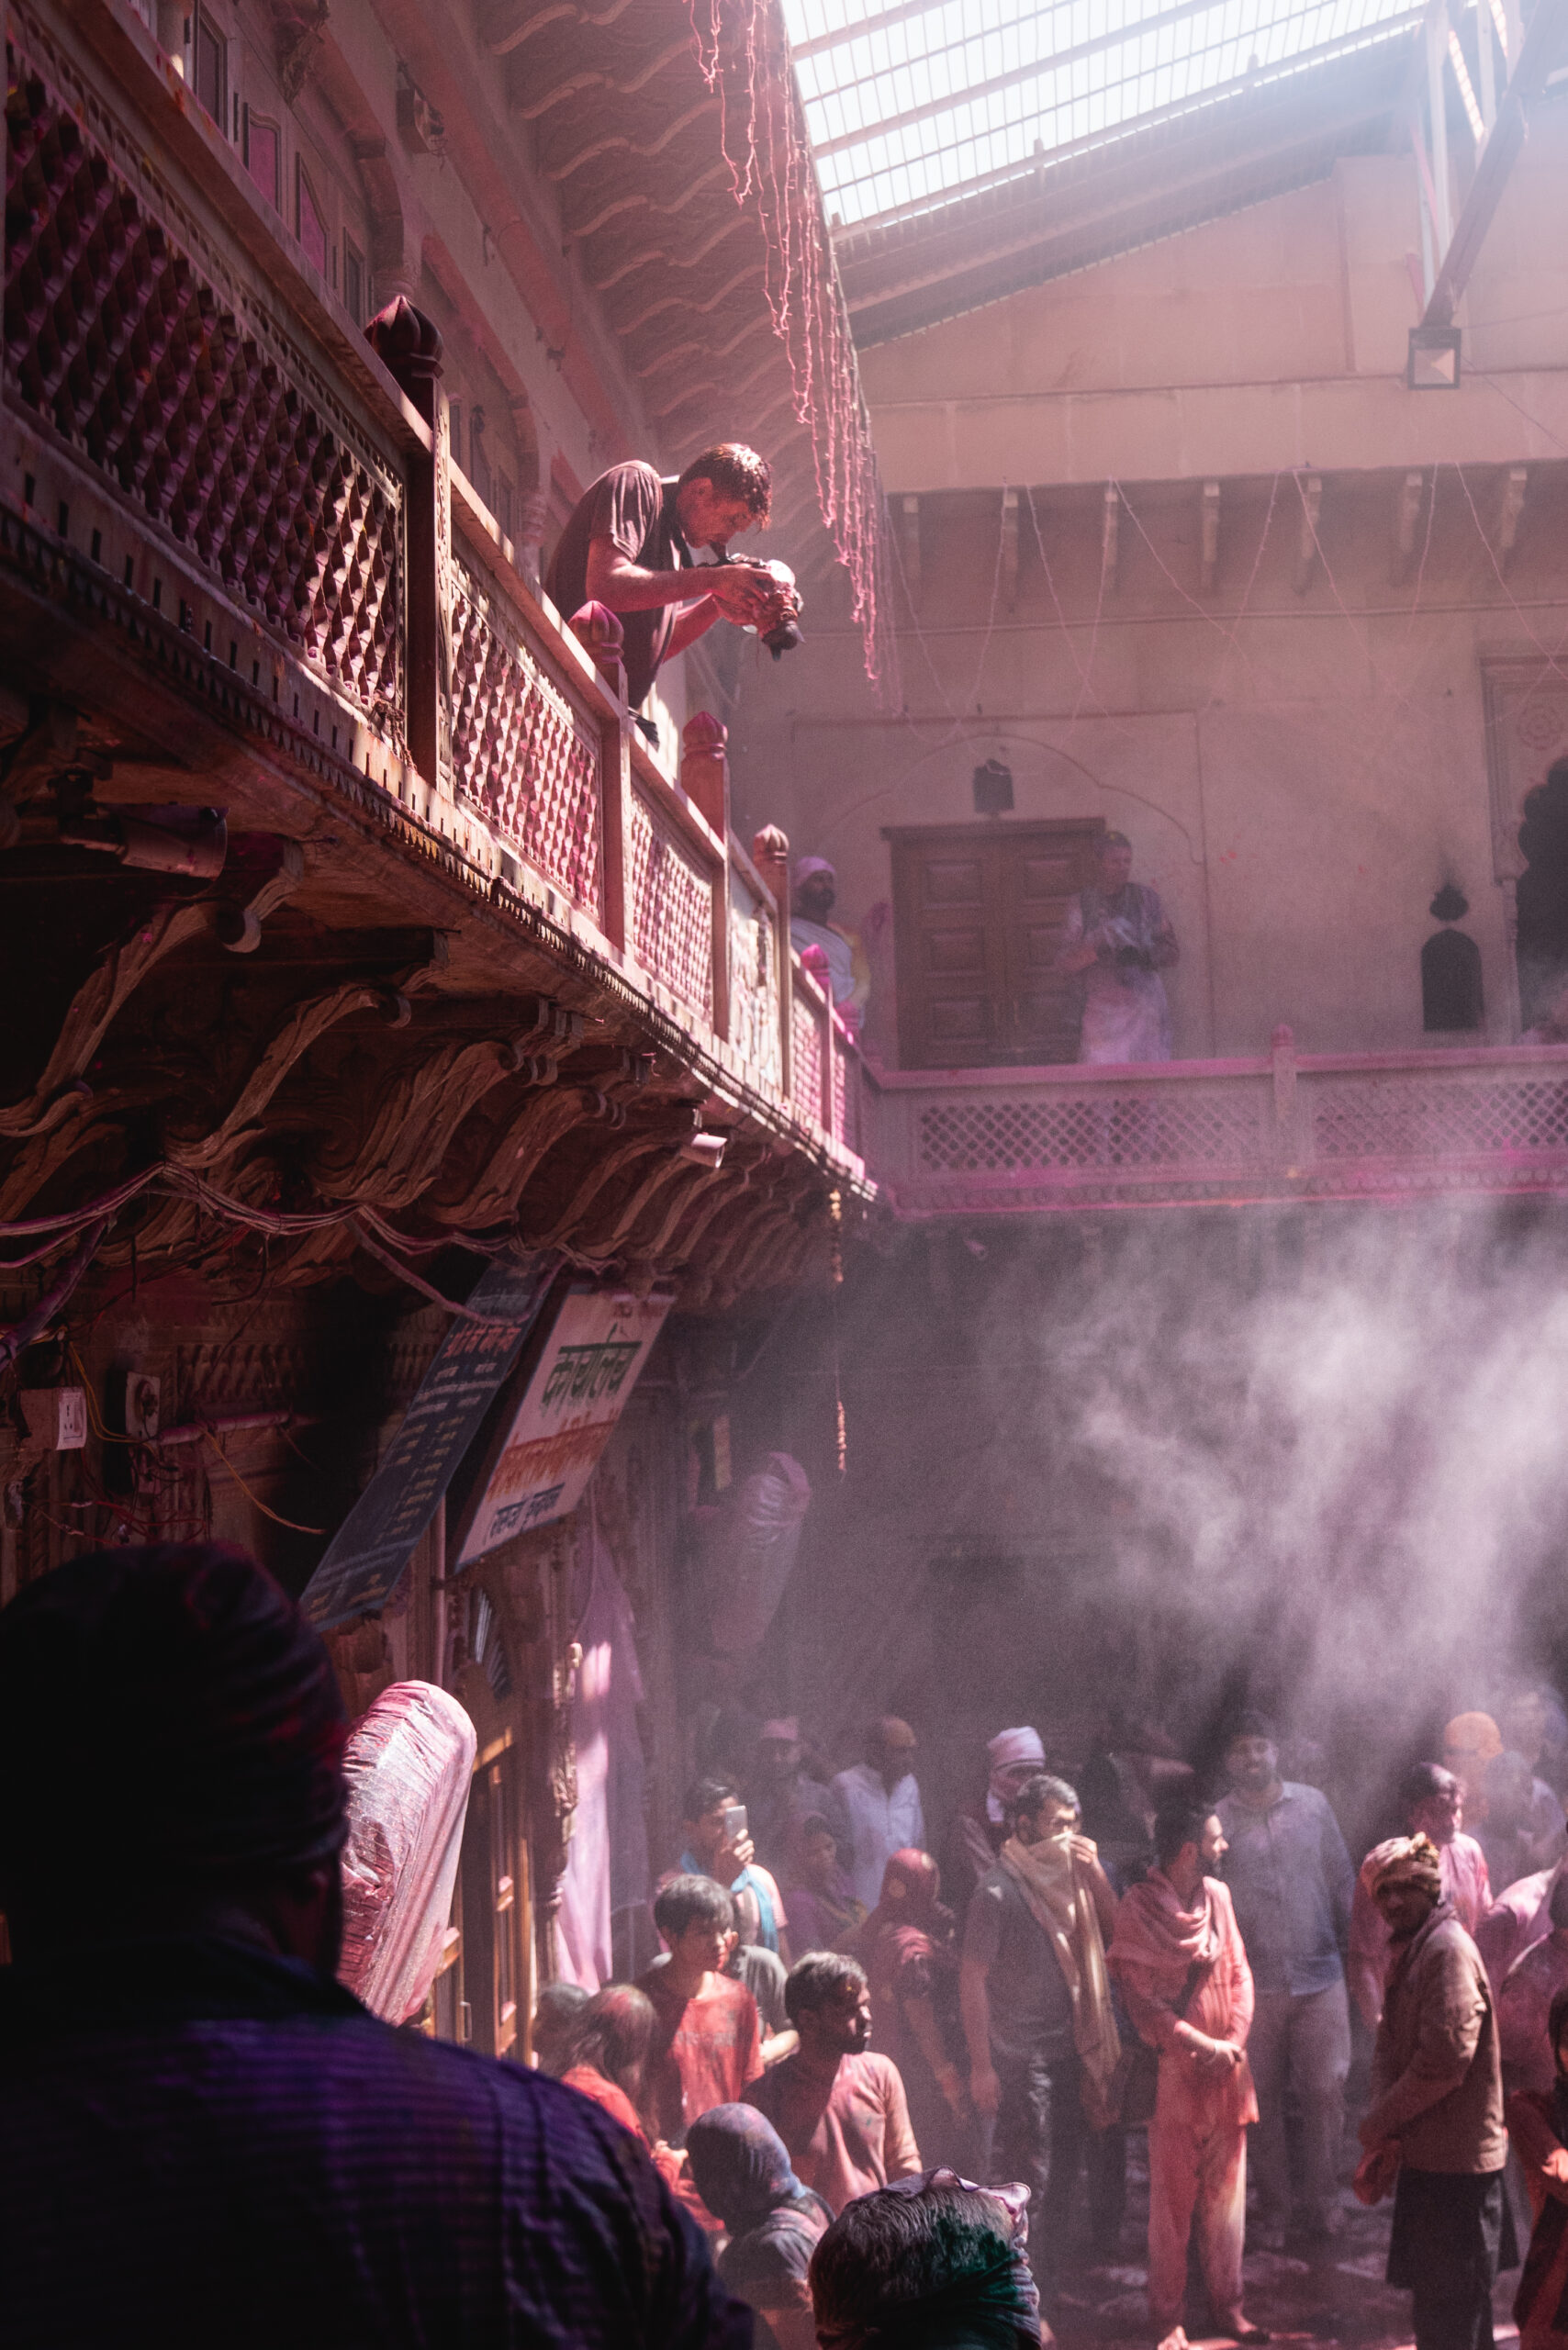 Andrew Studer photographing the Holi Festival from a balcony at a temple in Vrindavan. Photo by Paul V Harrison